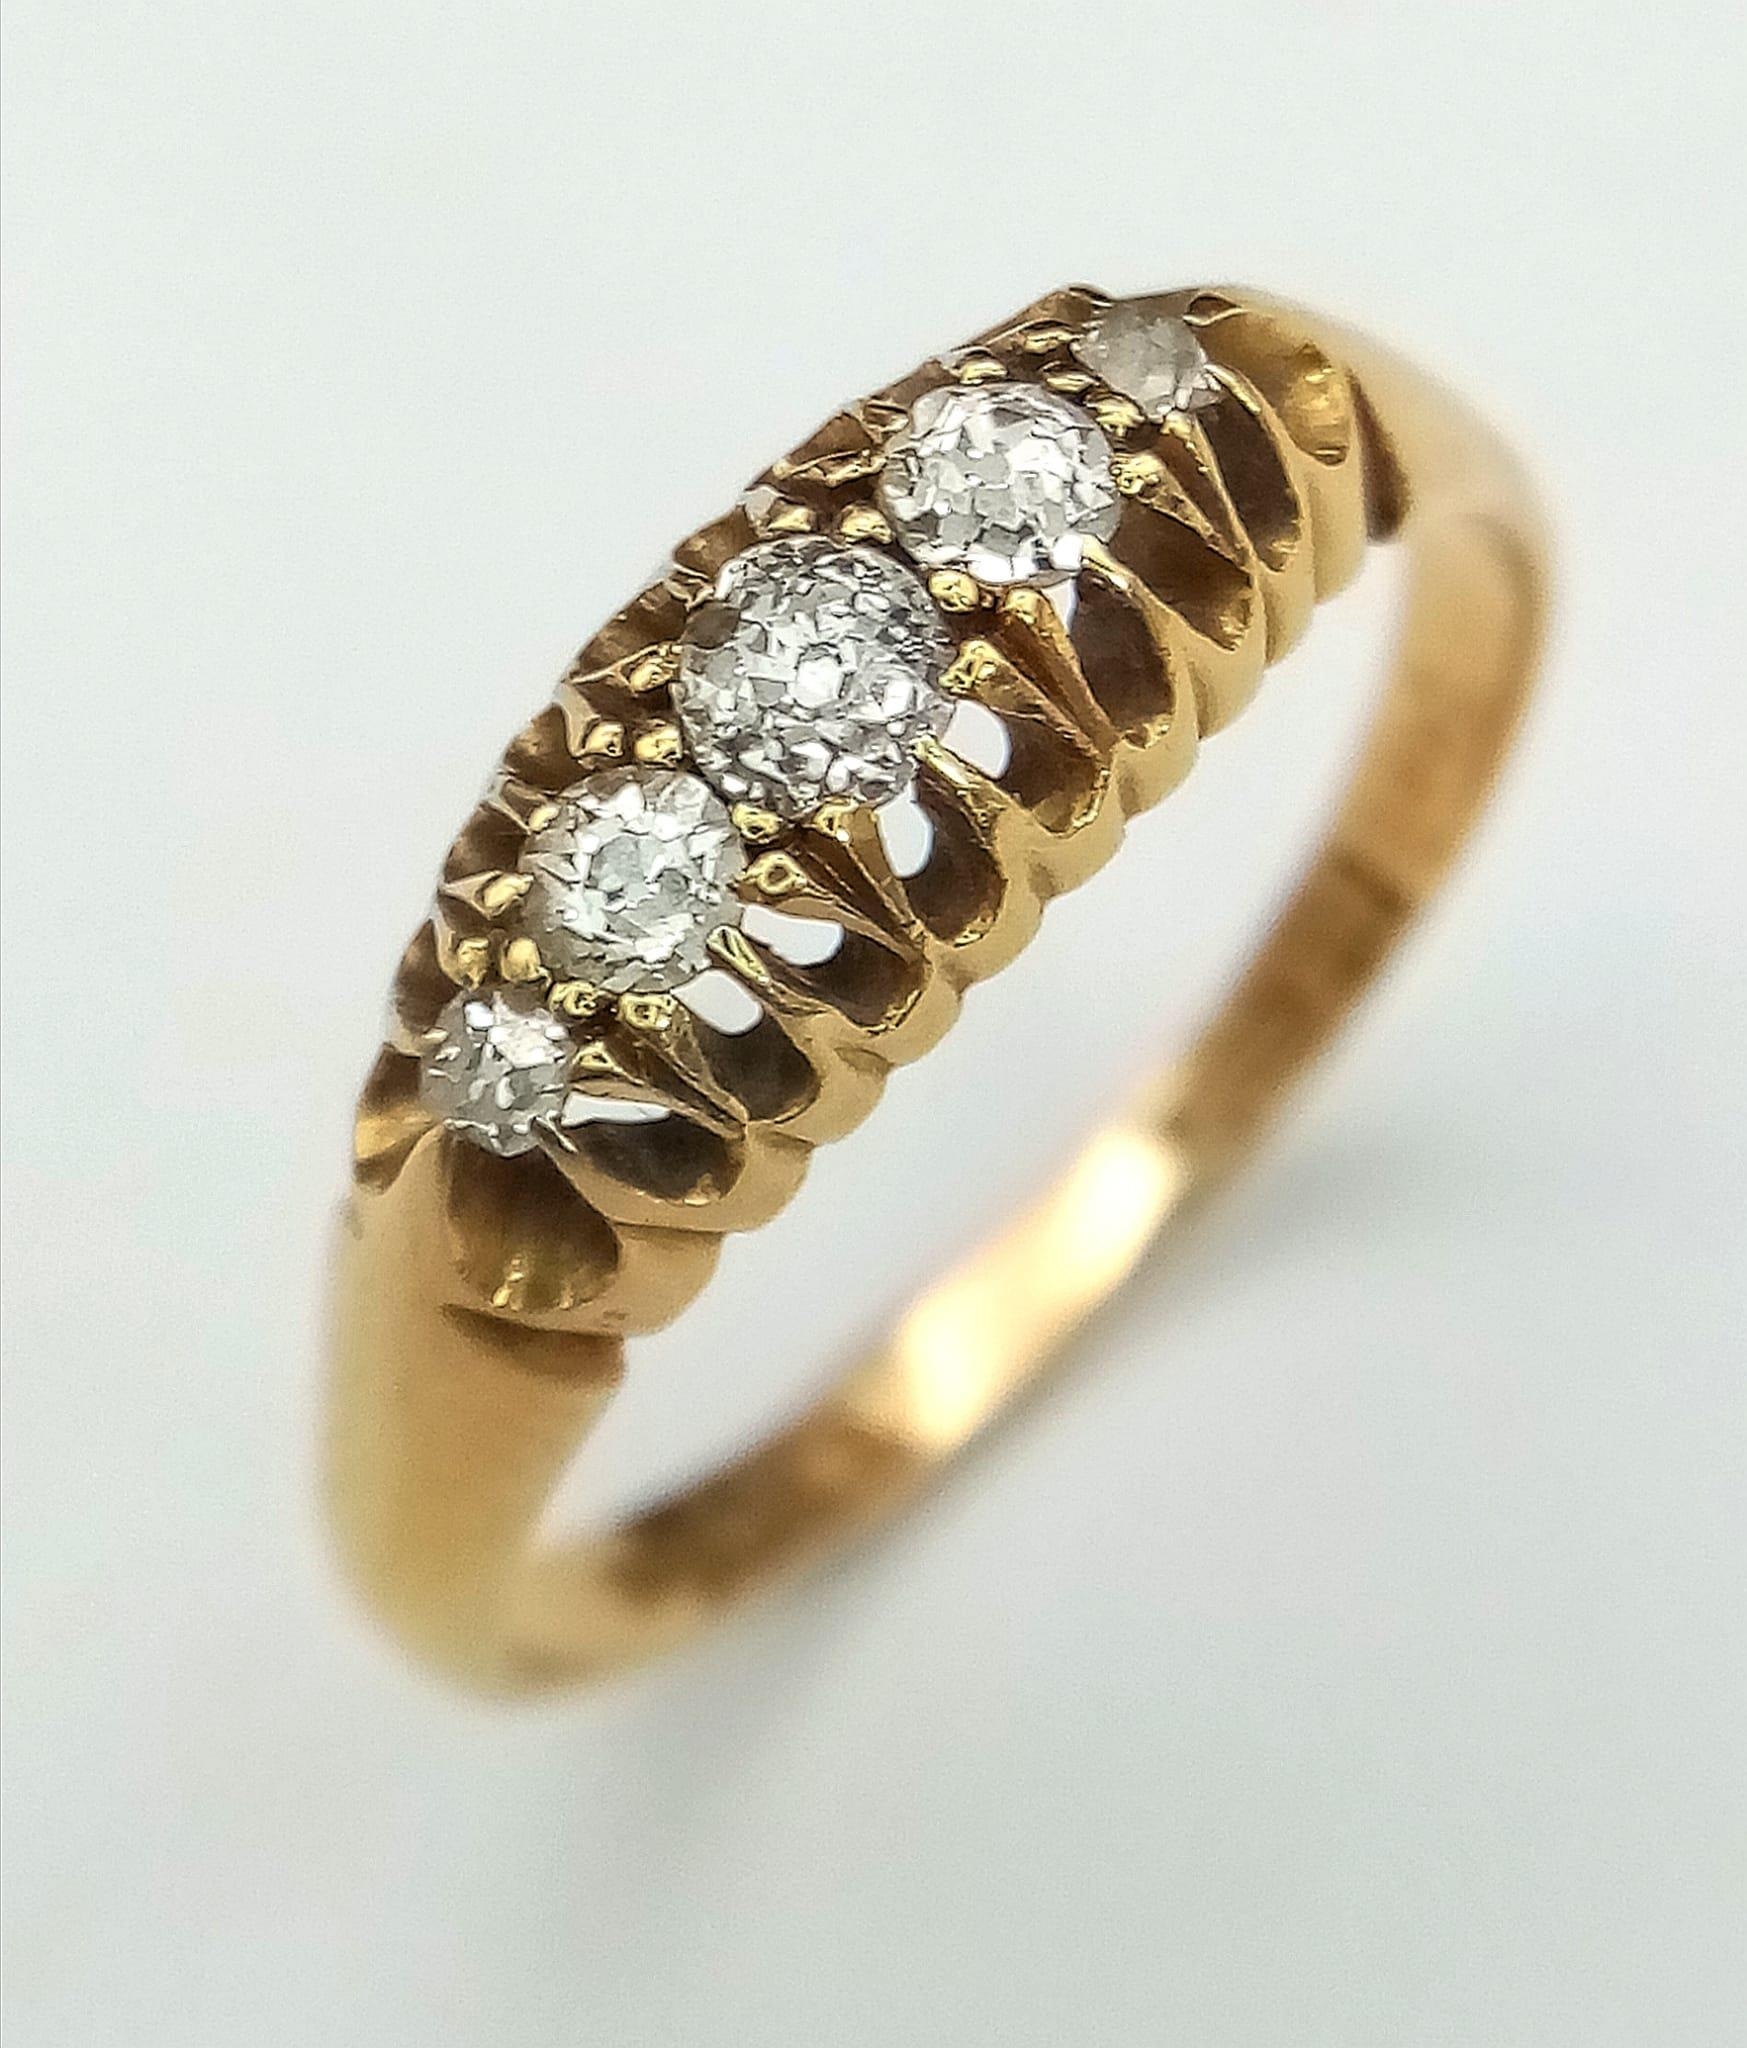 A VINTAGE 18K YELLOW GOLD, 5 STONE OLD CUT DIAMOND RING. Size R, 0.40ctw, 3.3g total weight. - Image 2 of 5